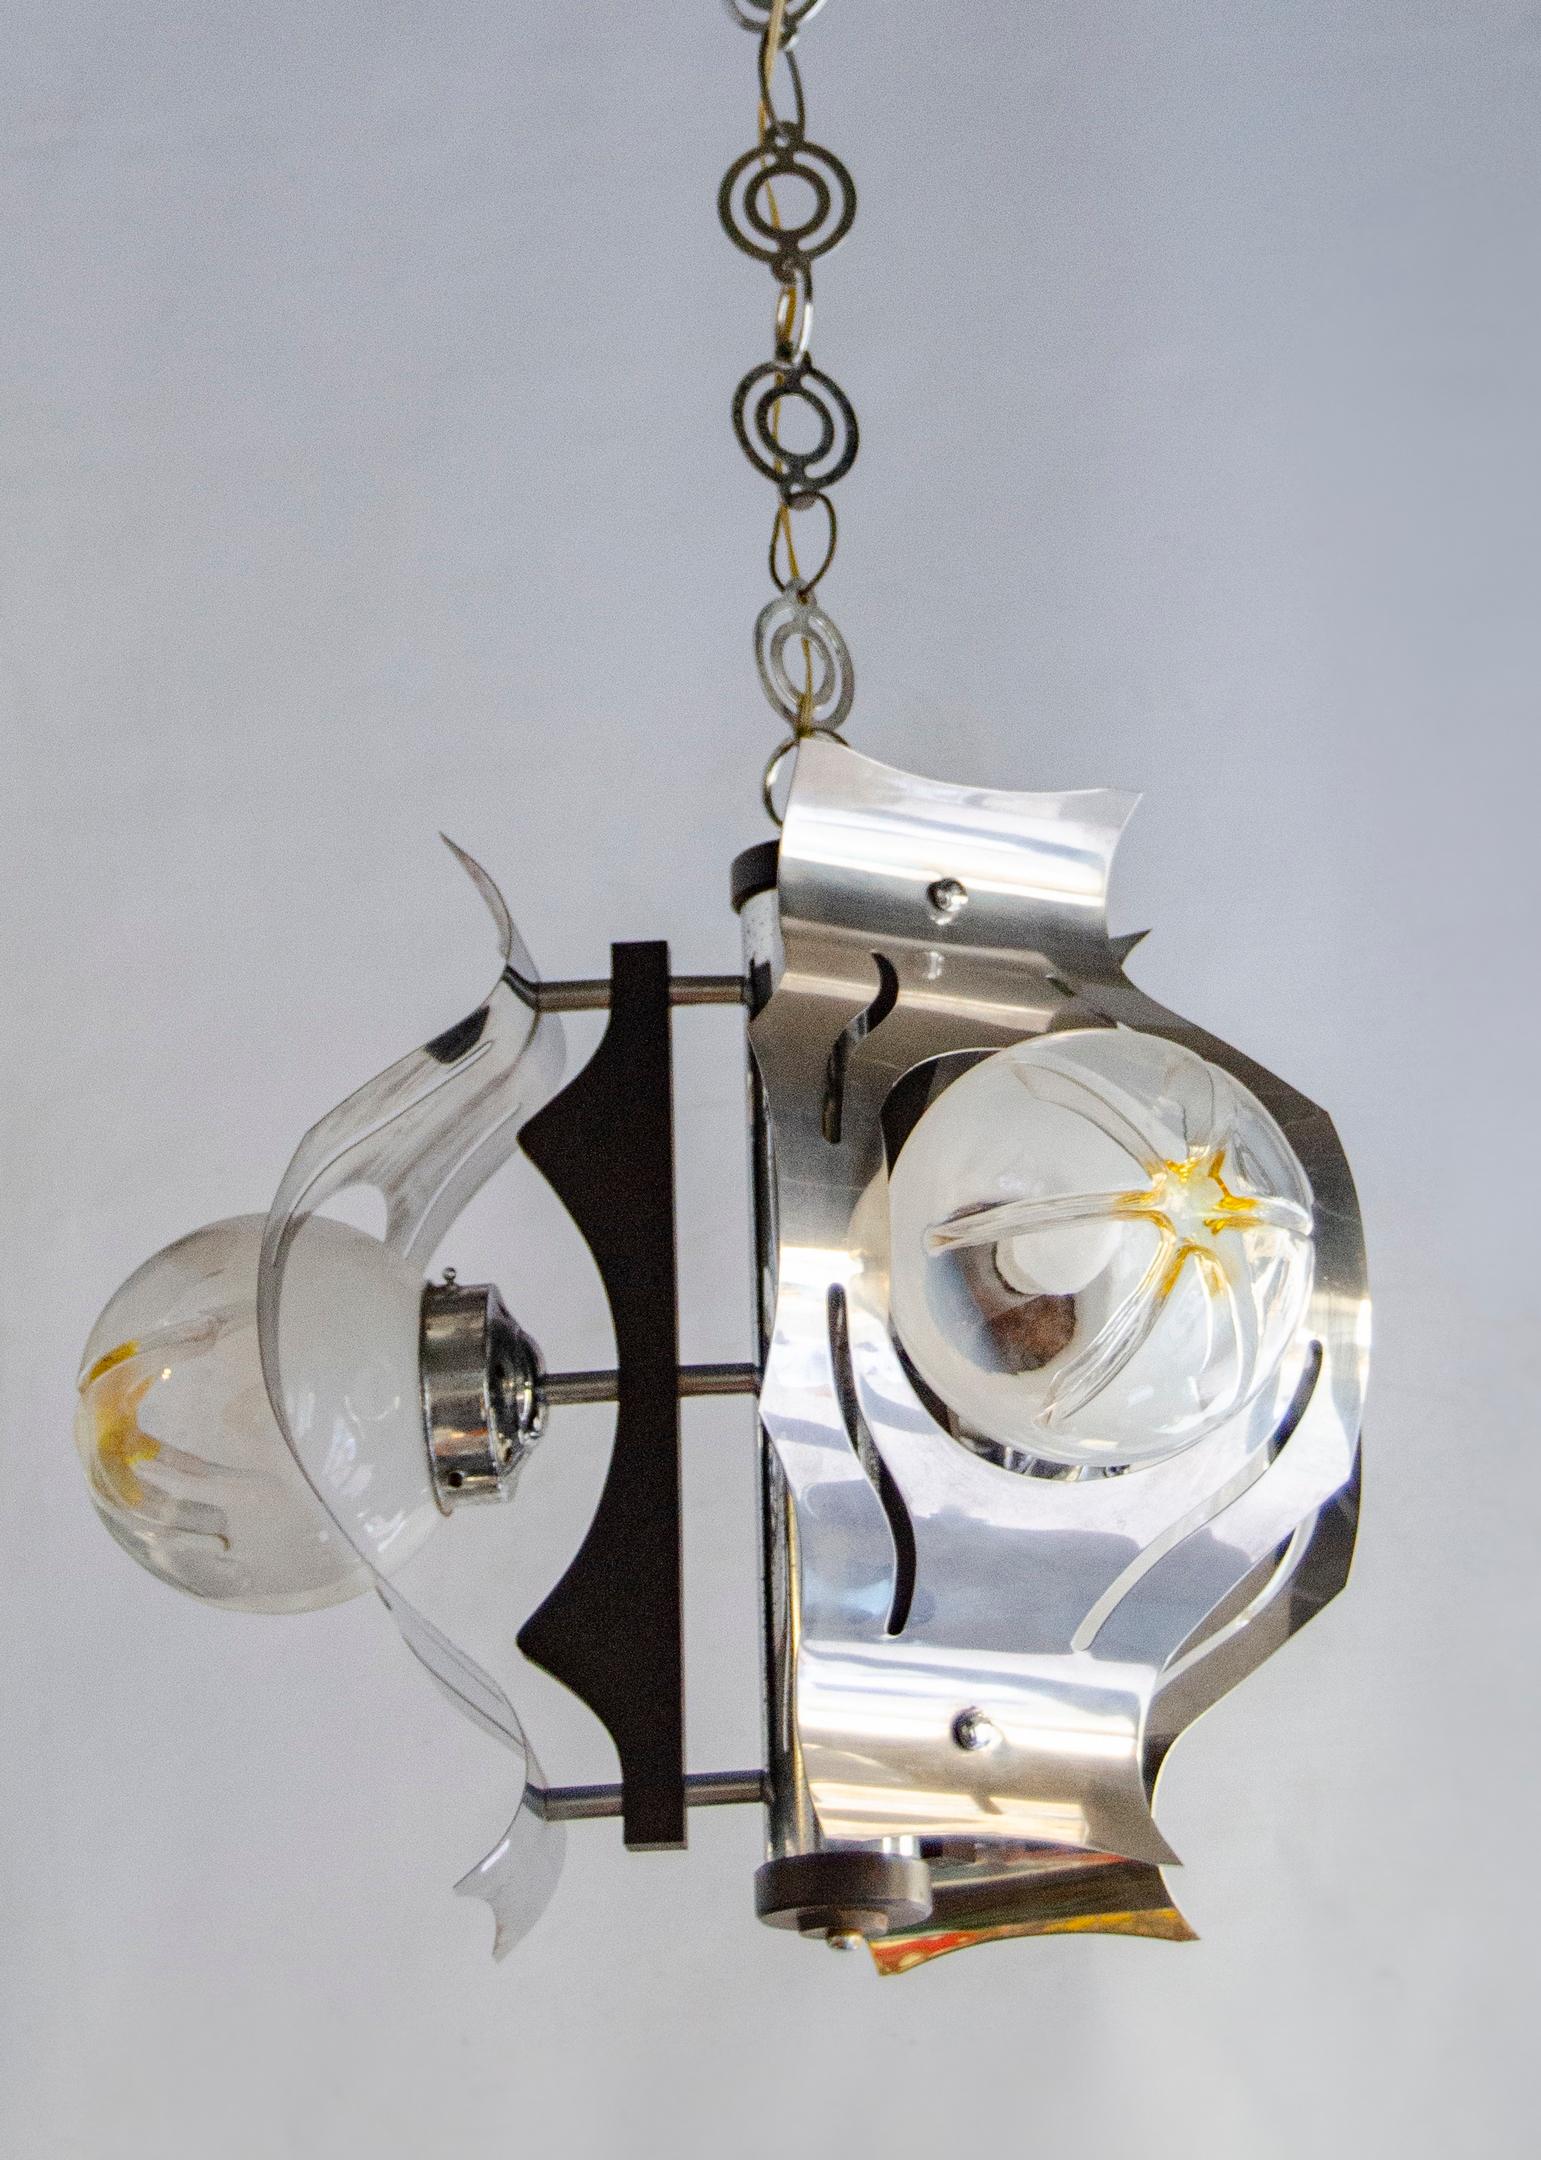 Italian ceiling lamp from the 1950s, Mazzega
Created Mazzega Fabricacion Italiana
3-light chandelier with murano glass and chrome metal globes
mid century
perfect condition
natural wear.